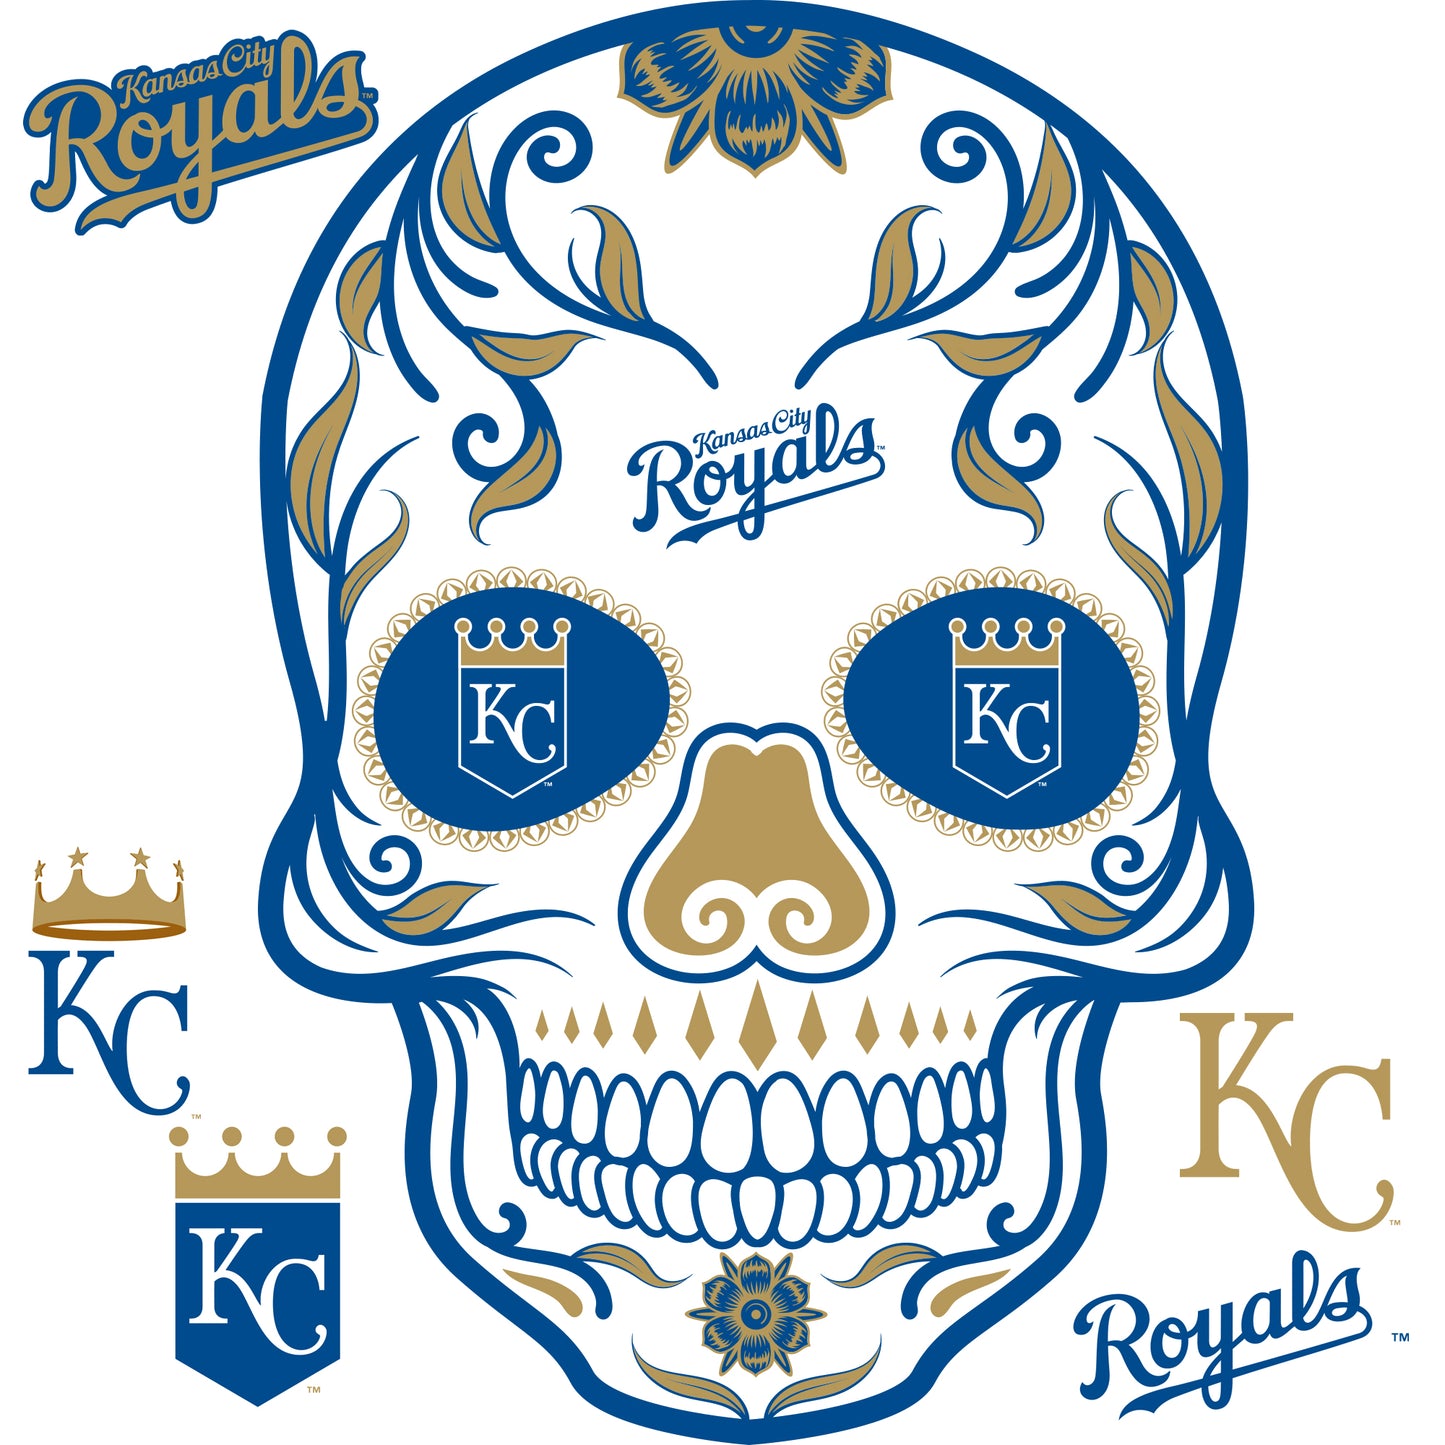 Fathers Day Gift for Dad Kansas City Royals gift kc royals fan Gifts for  Him - Kansas City Art kc royals dads gift